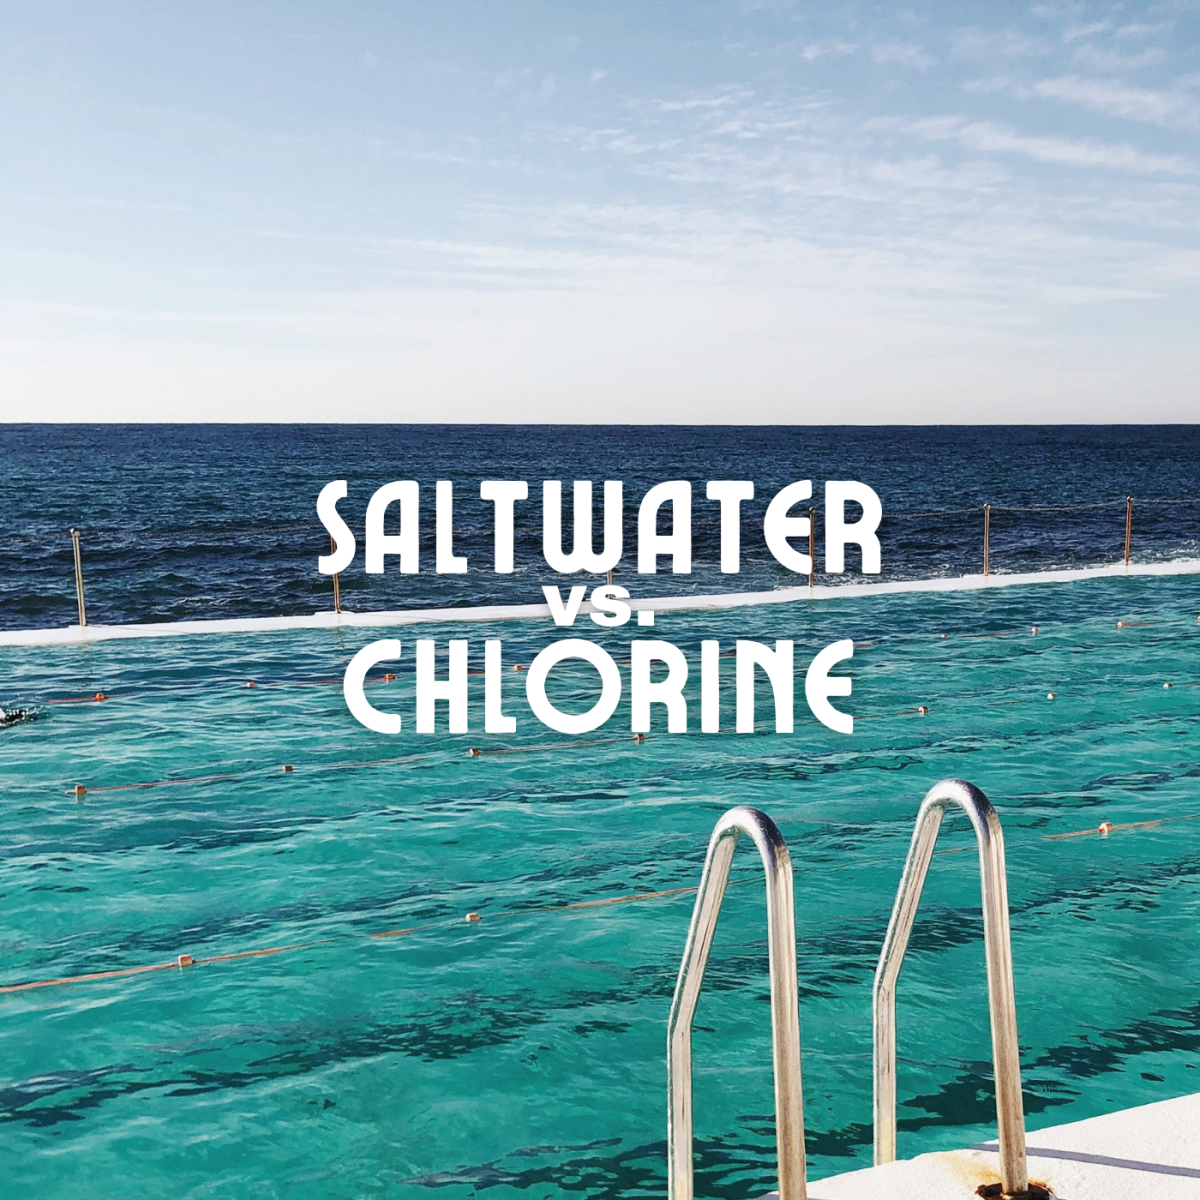 What is the difference between saltwater and chlorine swimming pools?